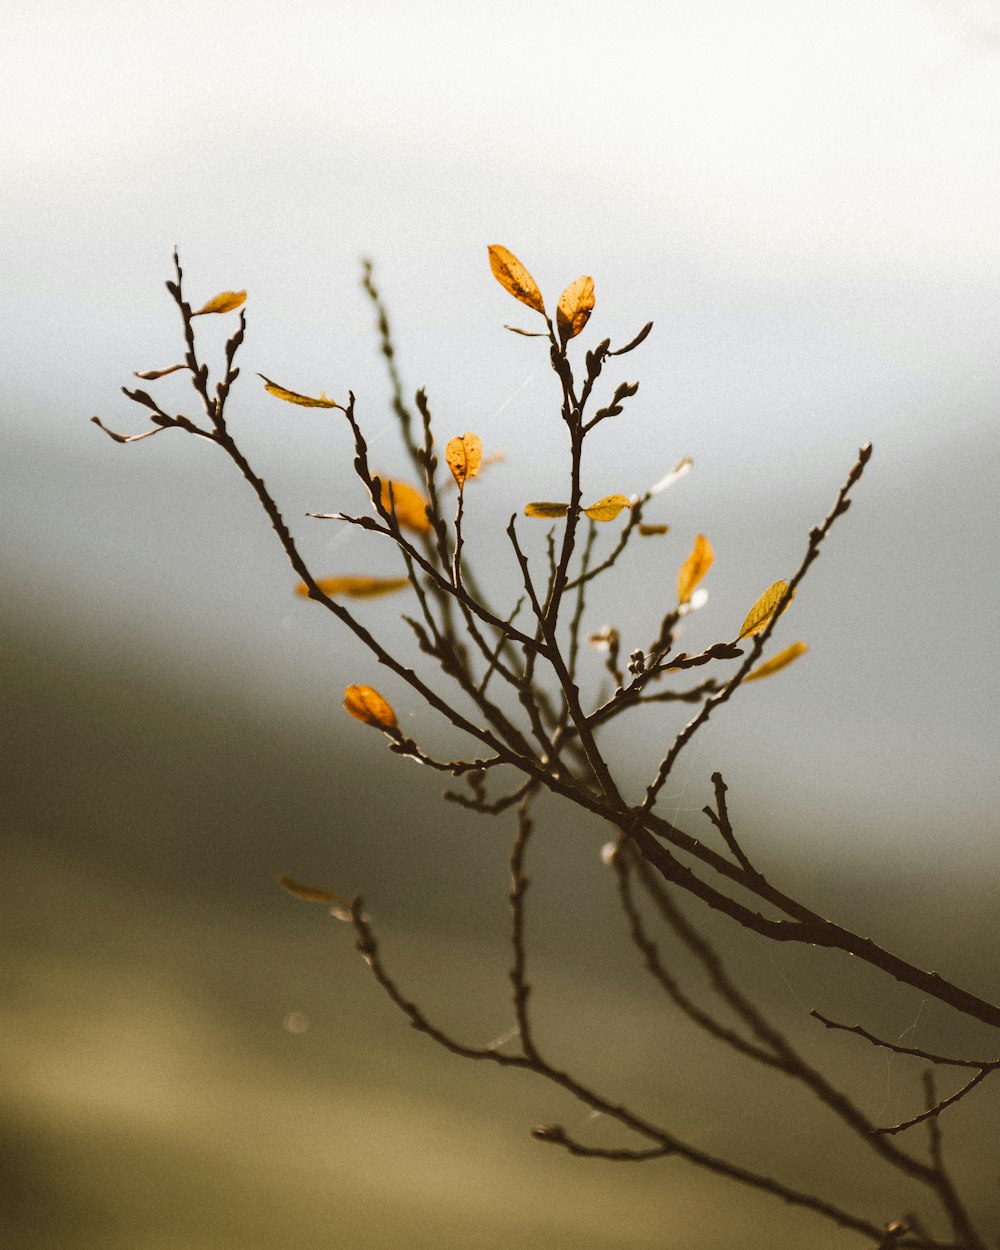 a branch with yellow flowers in the foreground